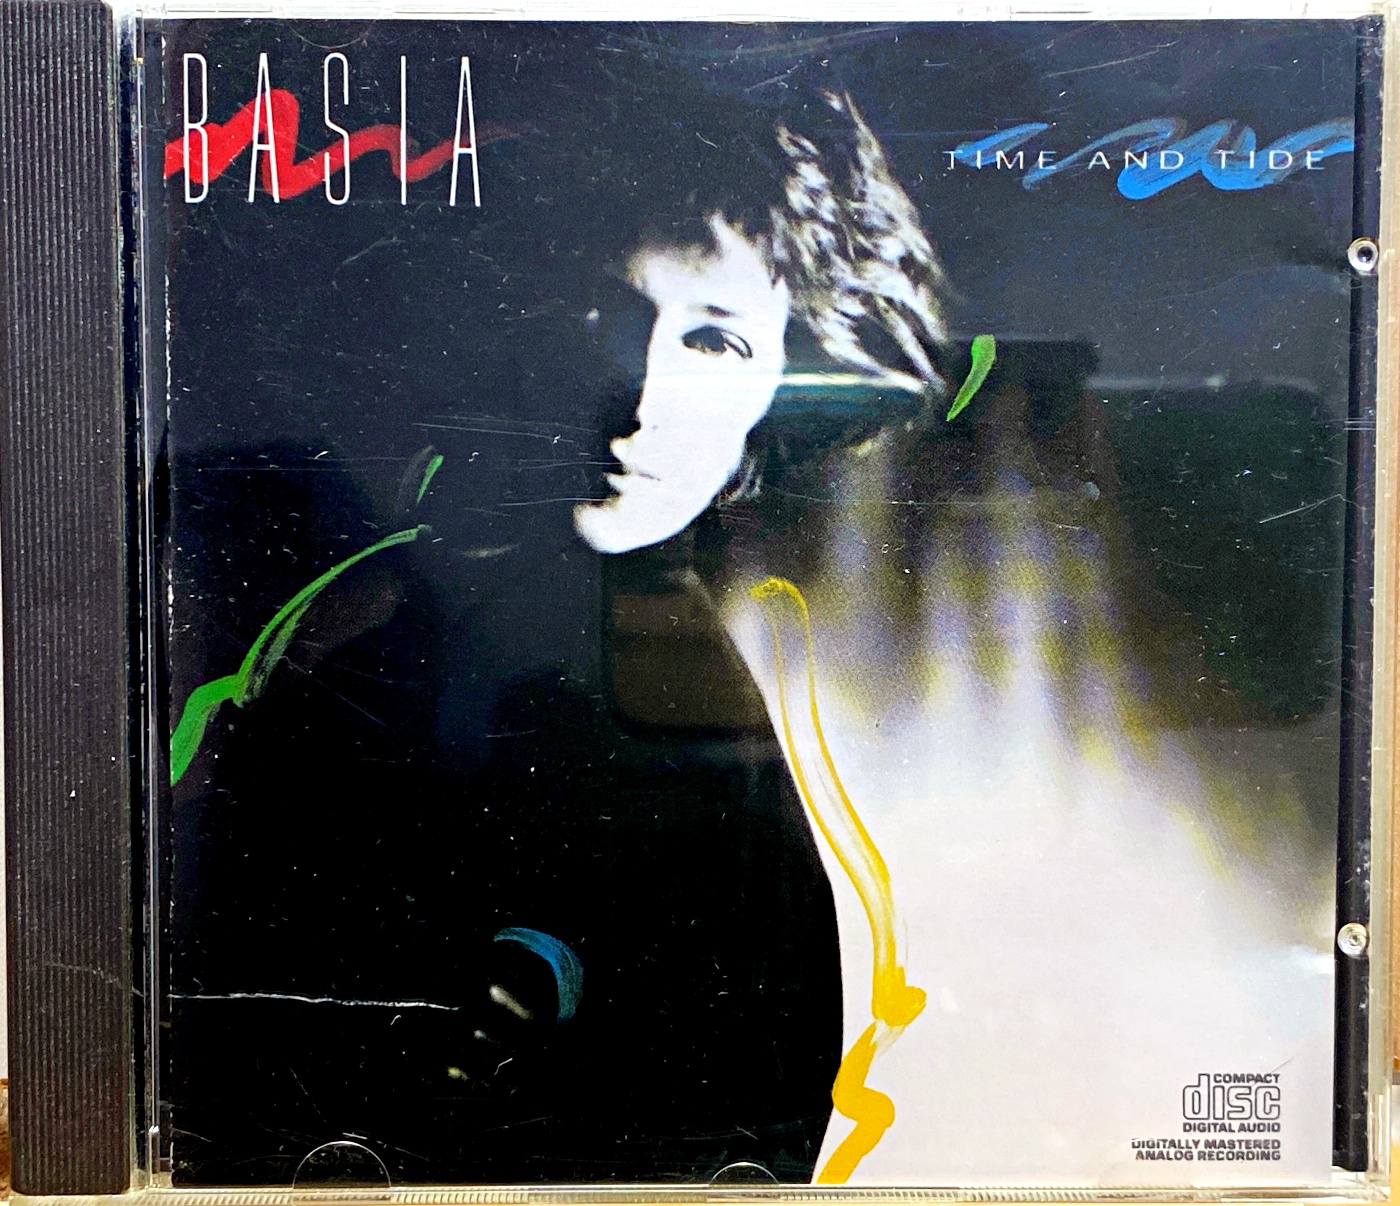 CD Basia – Time And Tide